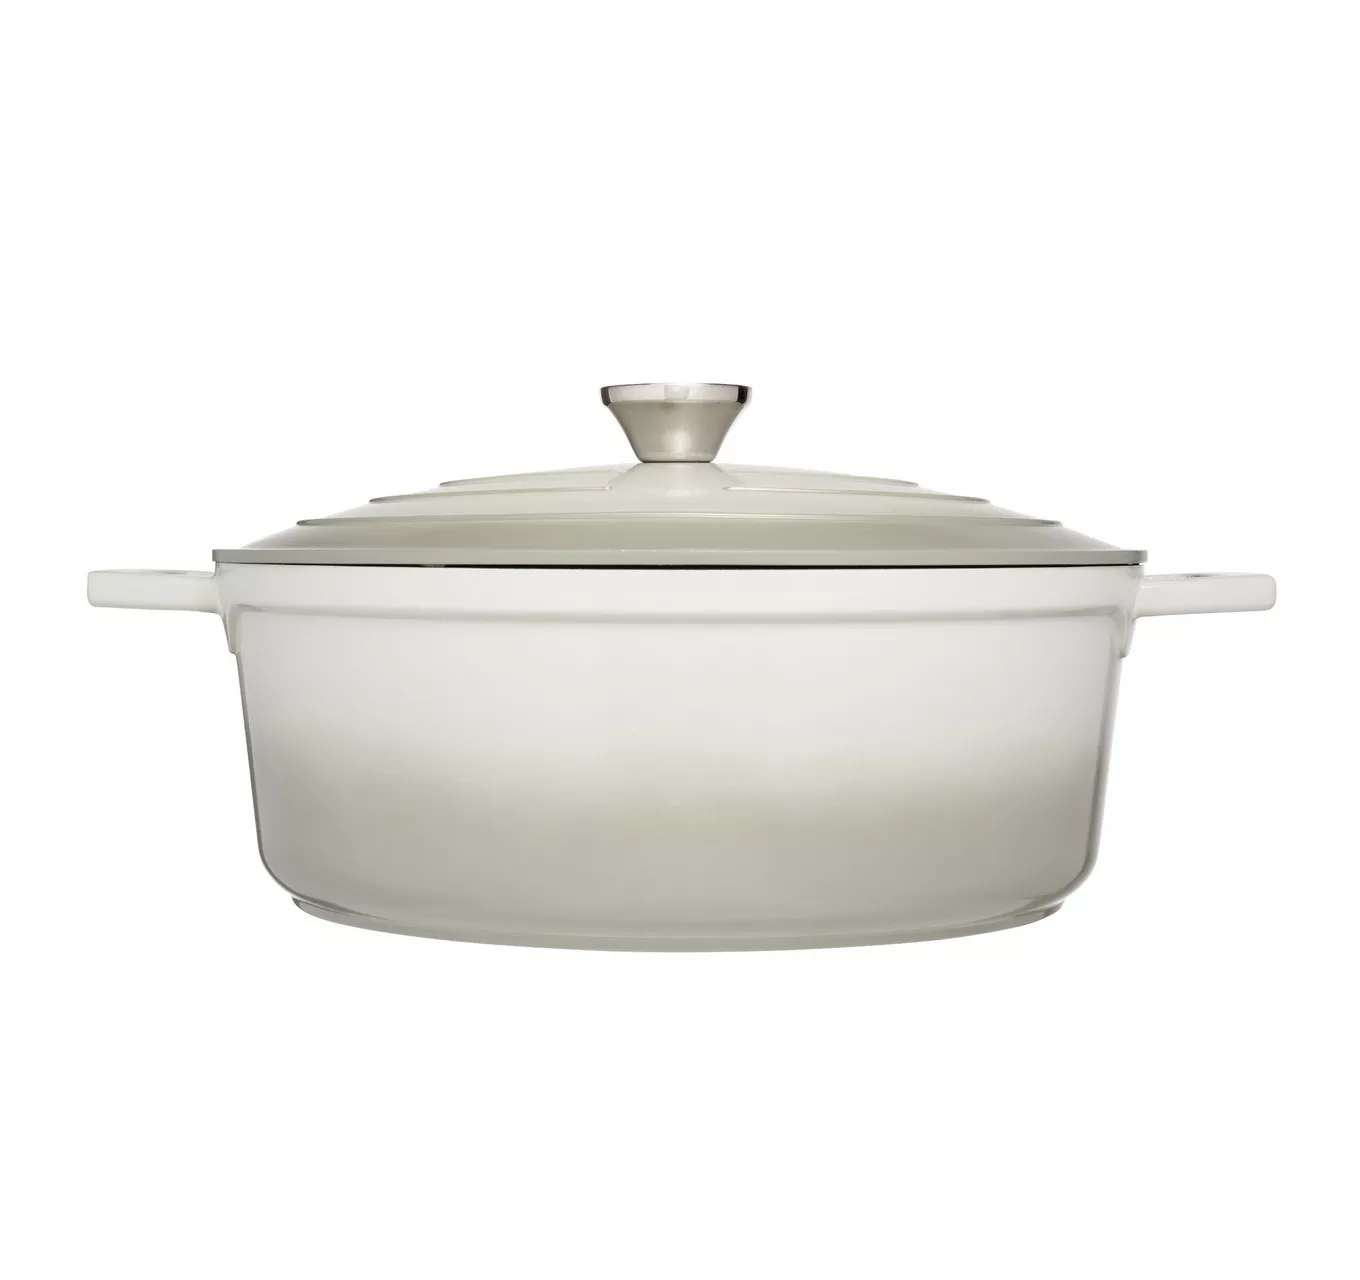 At Home Oval Casserole 32cm